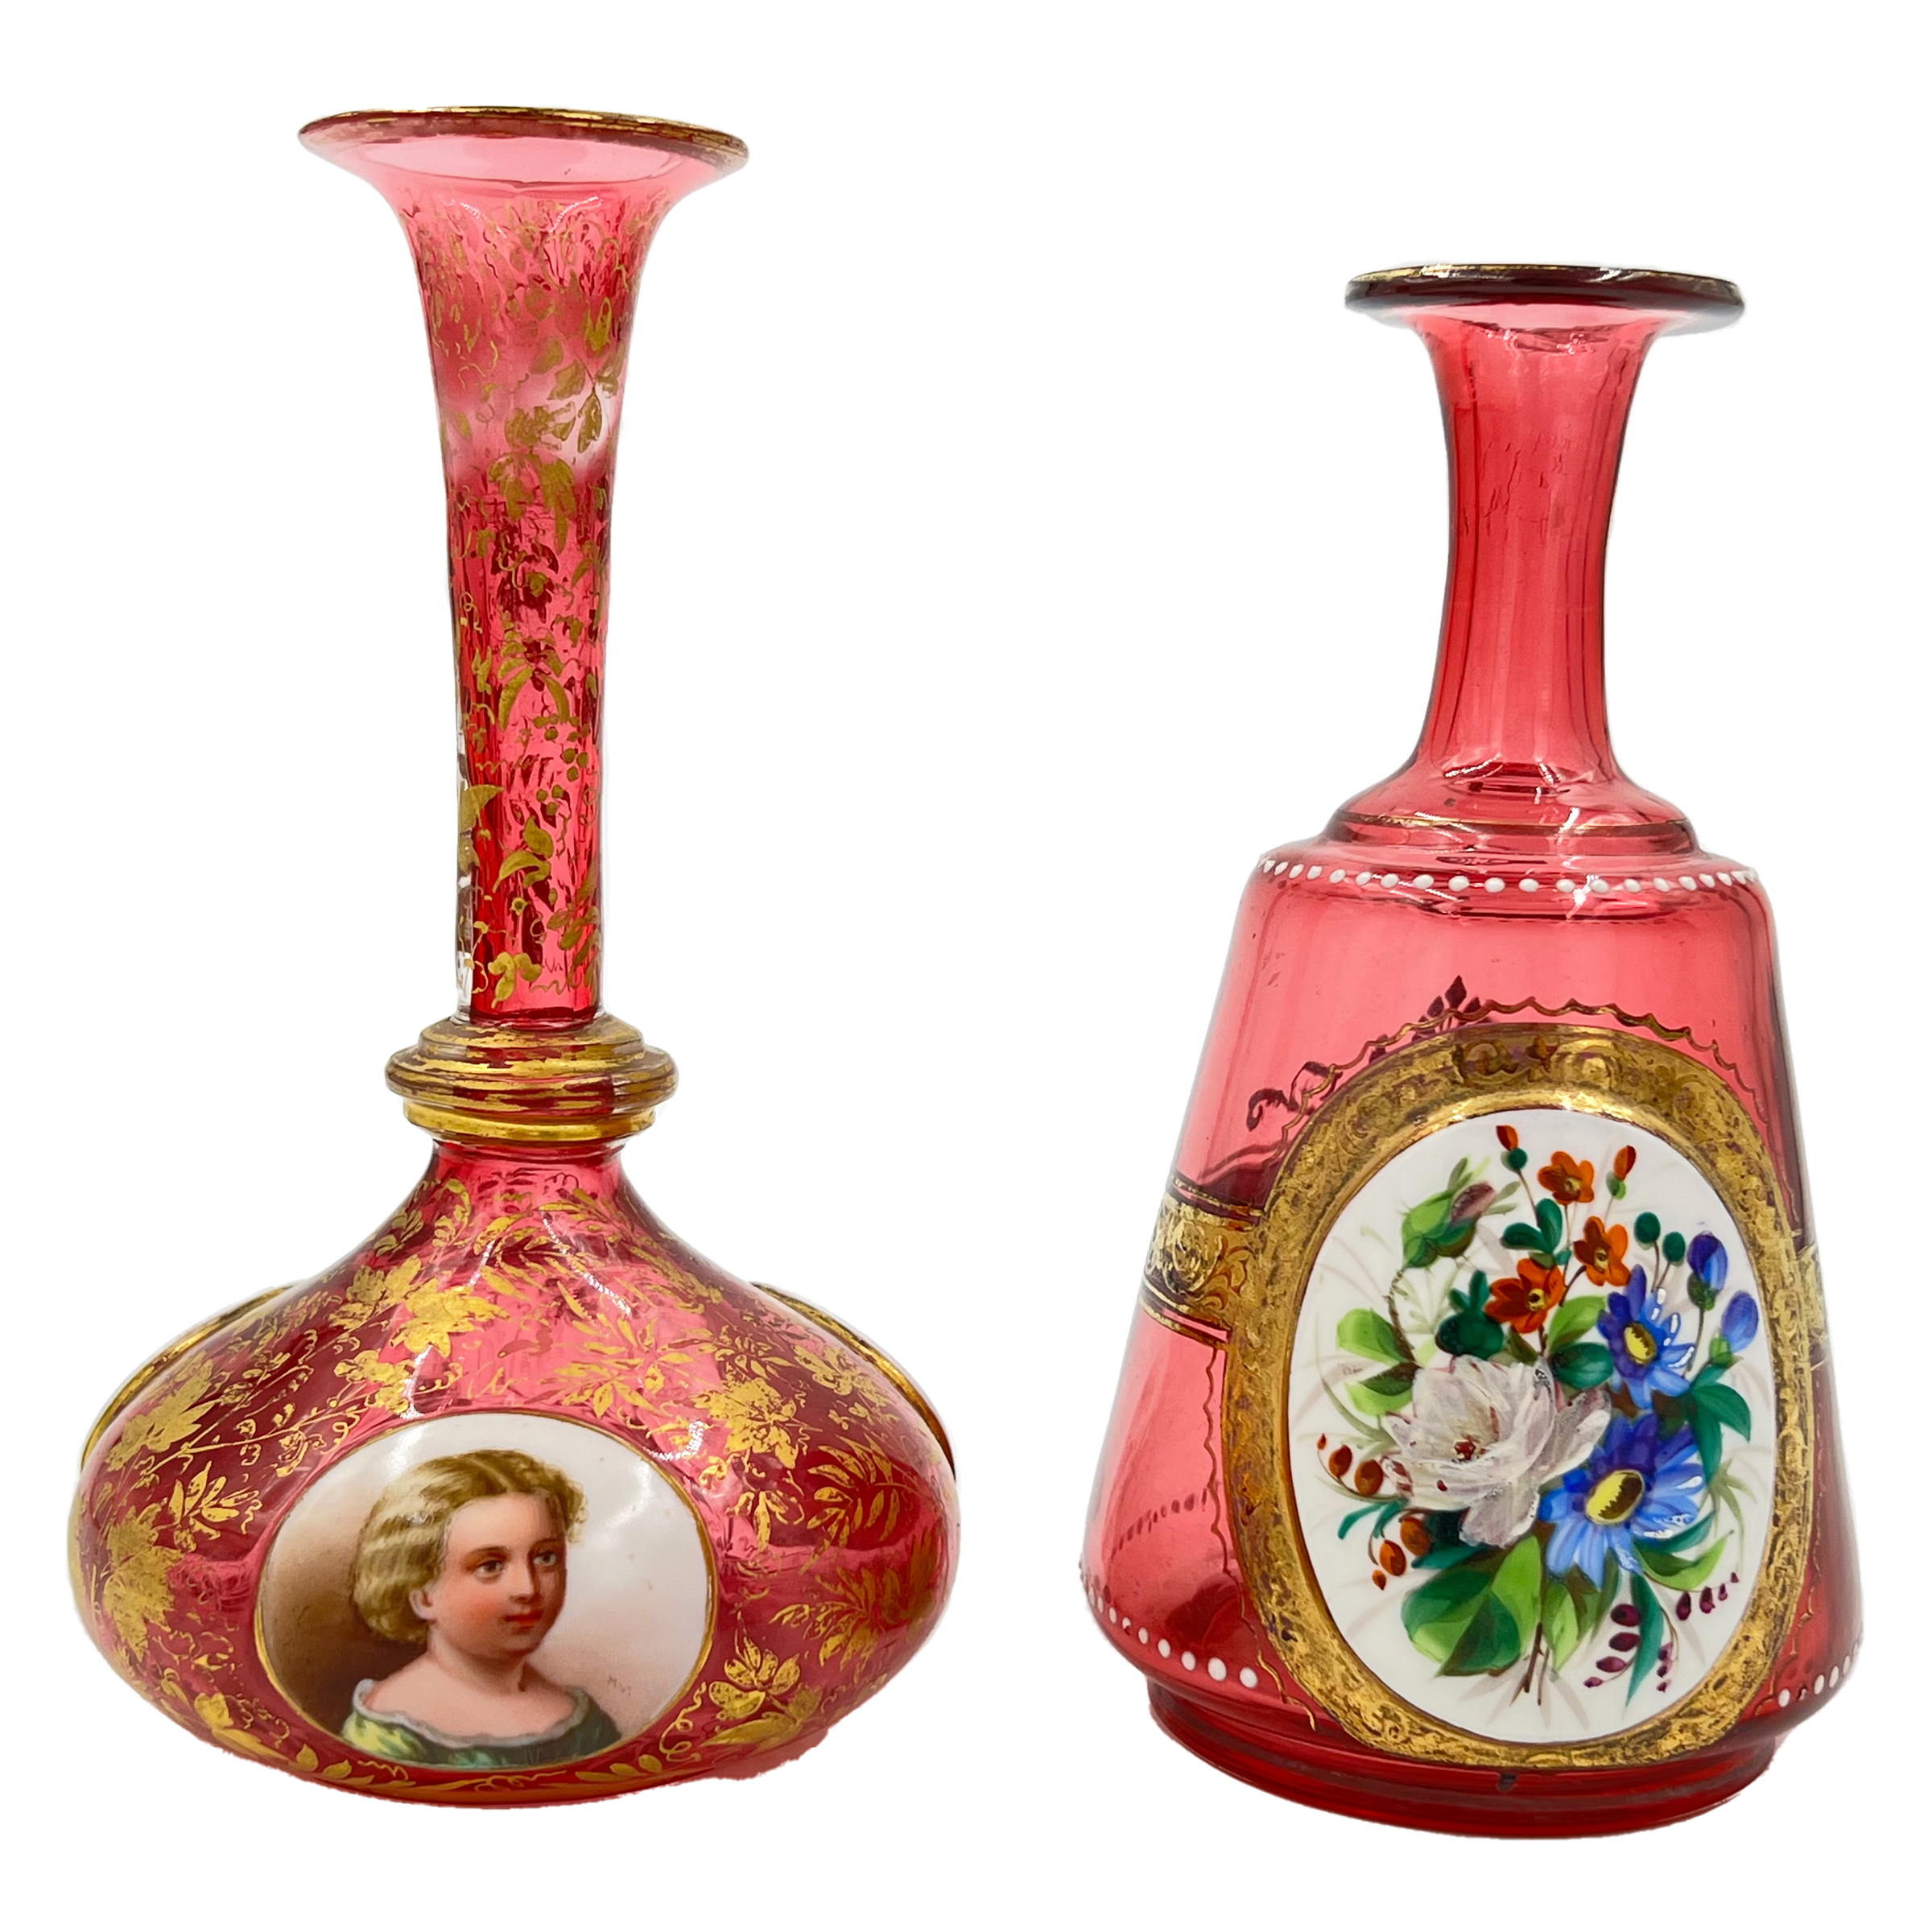 TWO RED BOHEMIAN GLASS VASES WITH OVAL PLAQUES, 19TH CENTURY